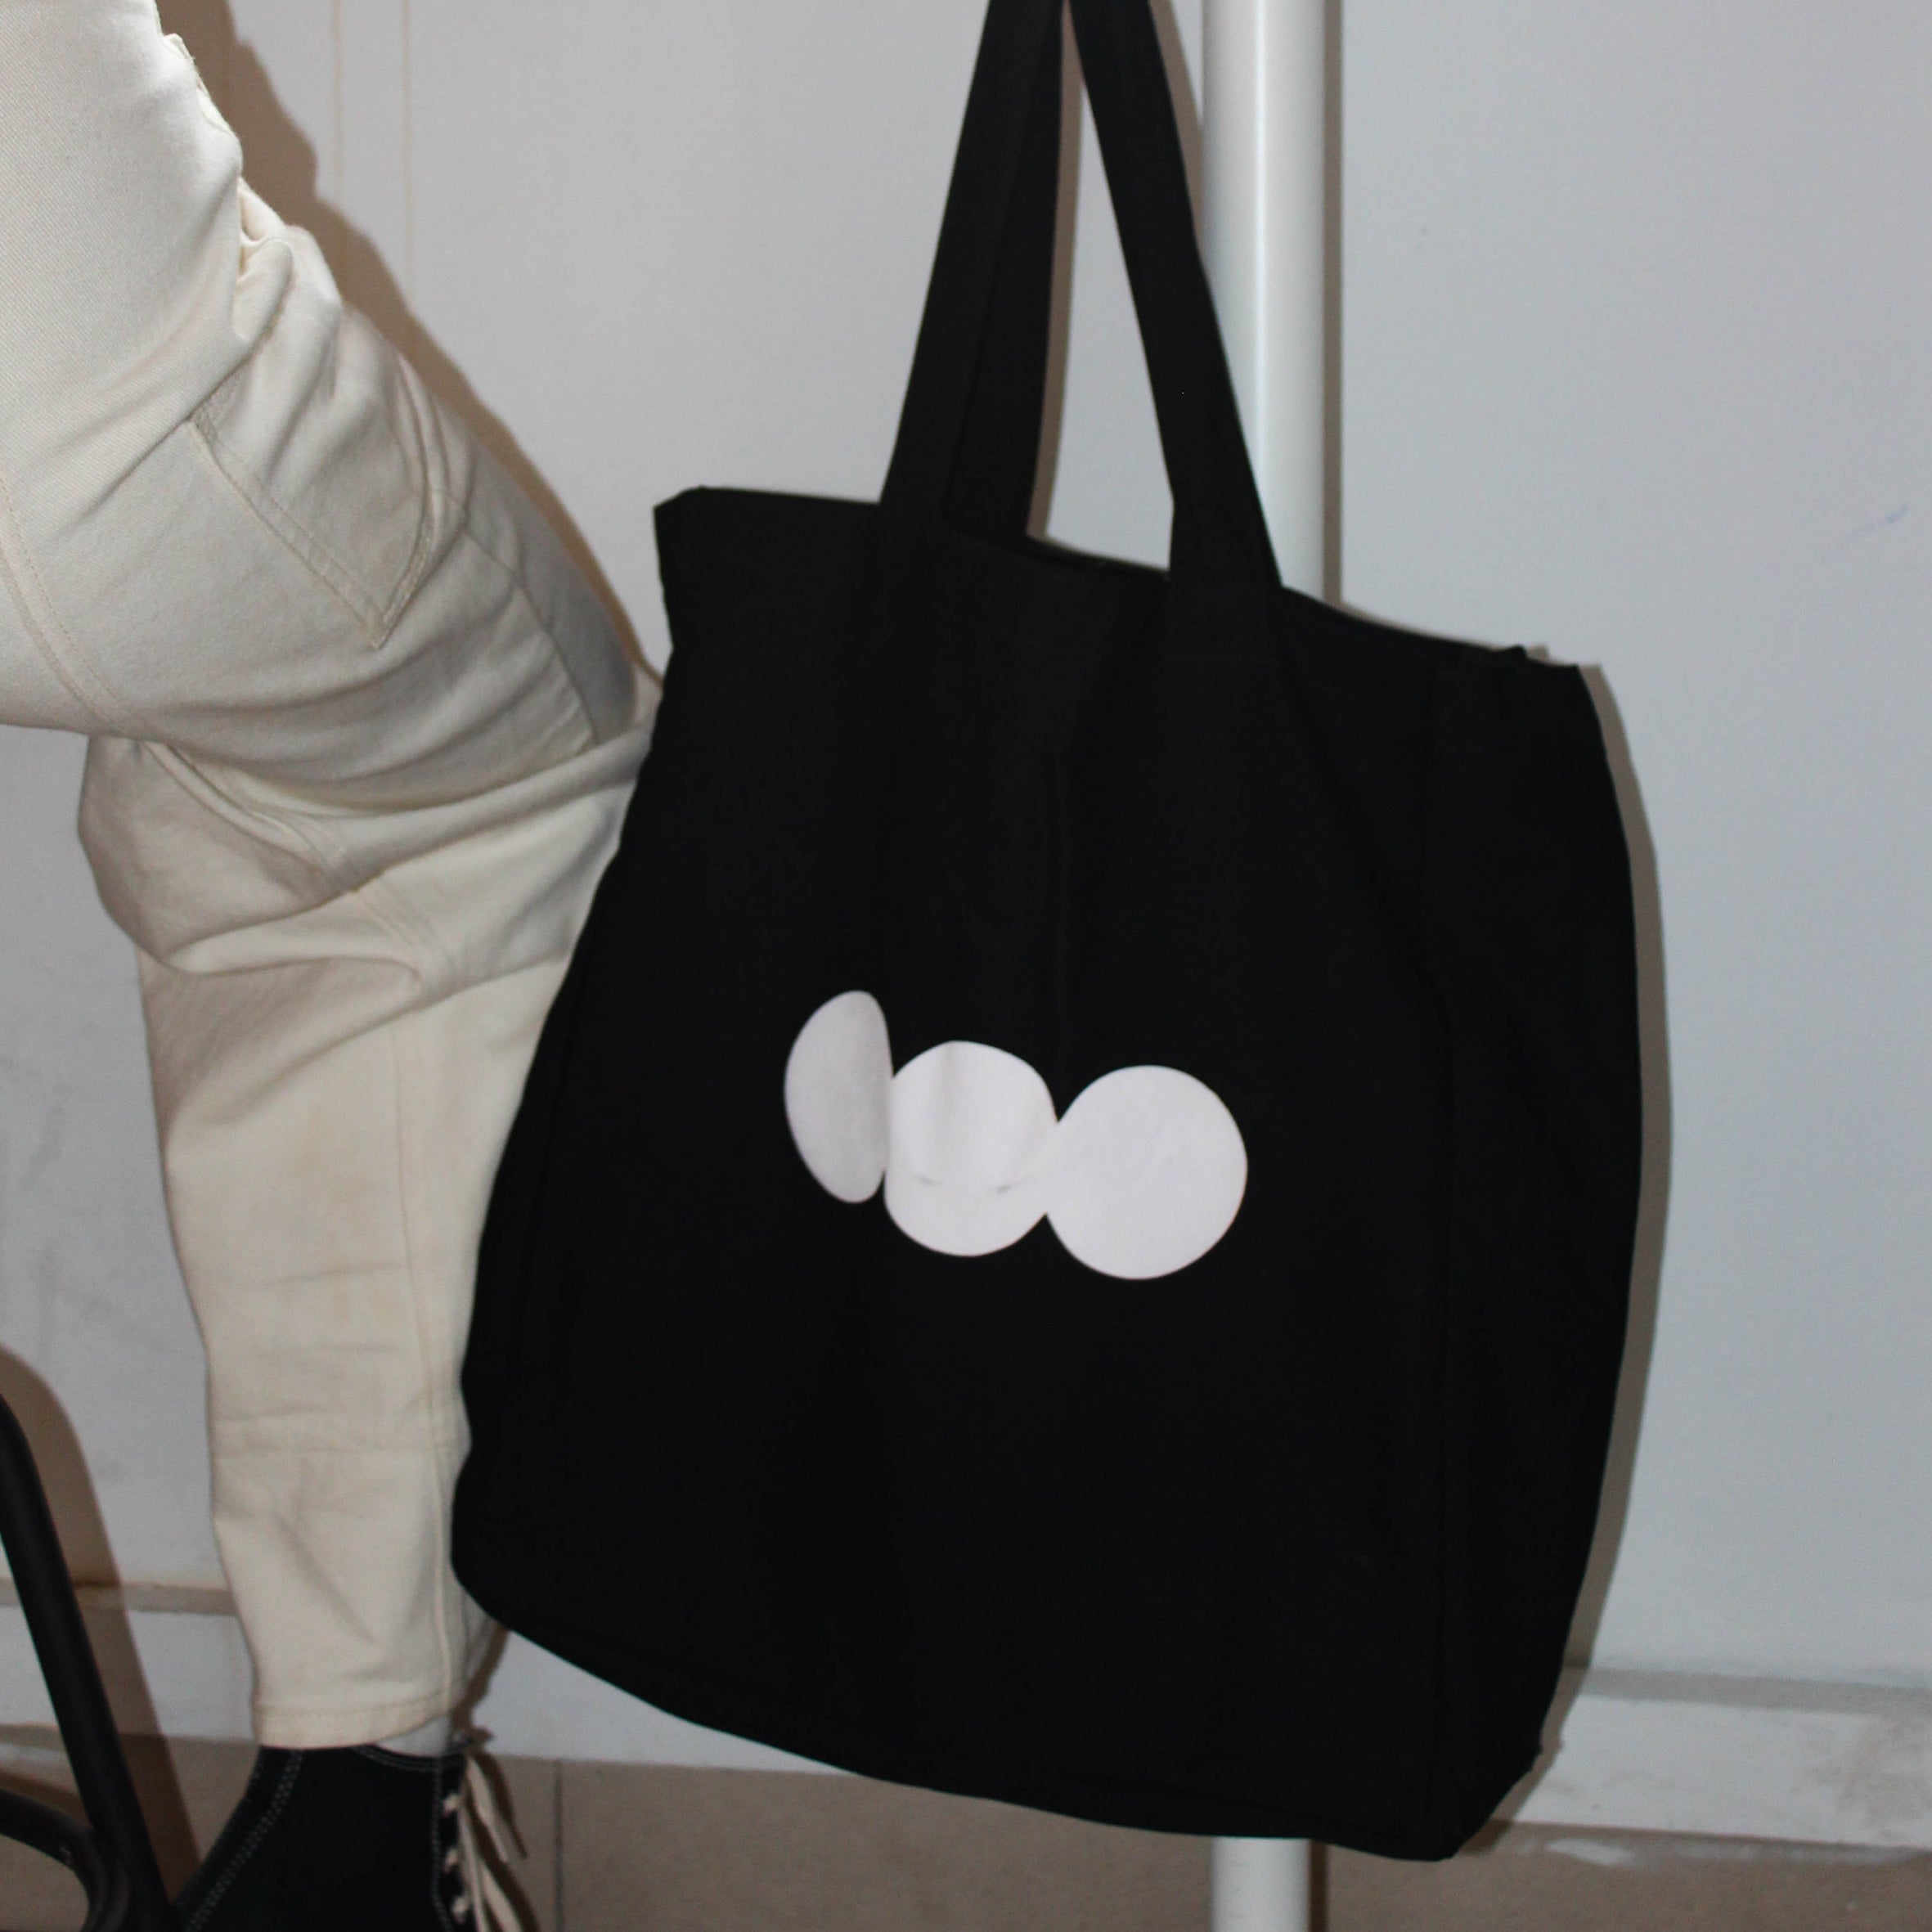 SPIN-OFF TOTE